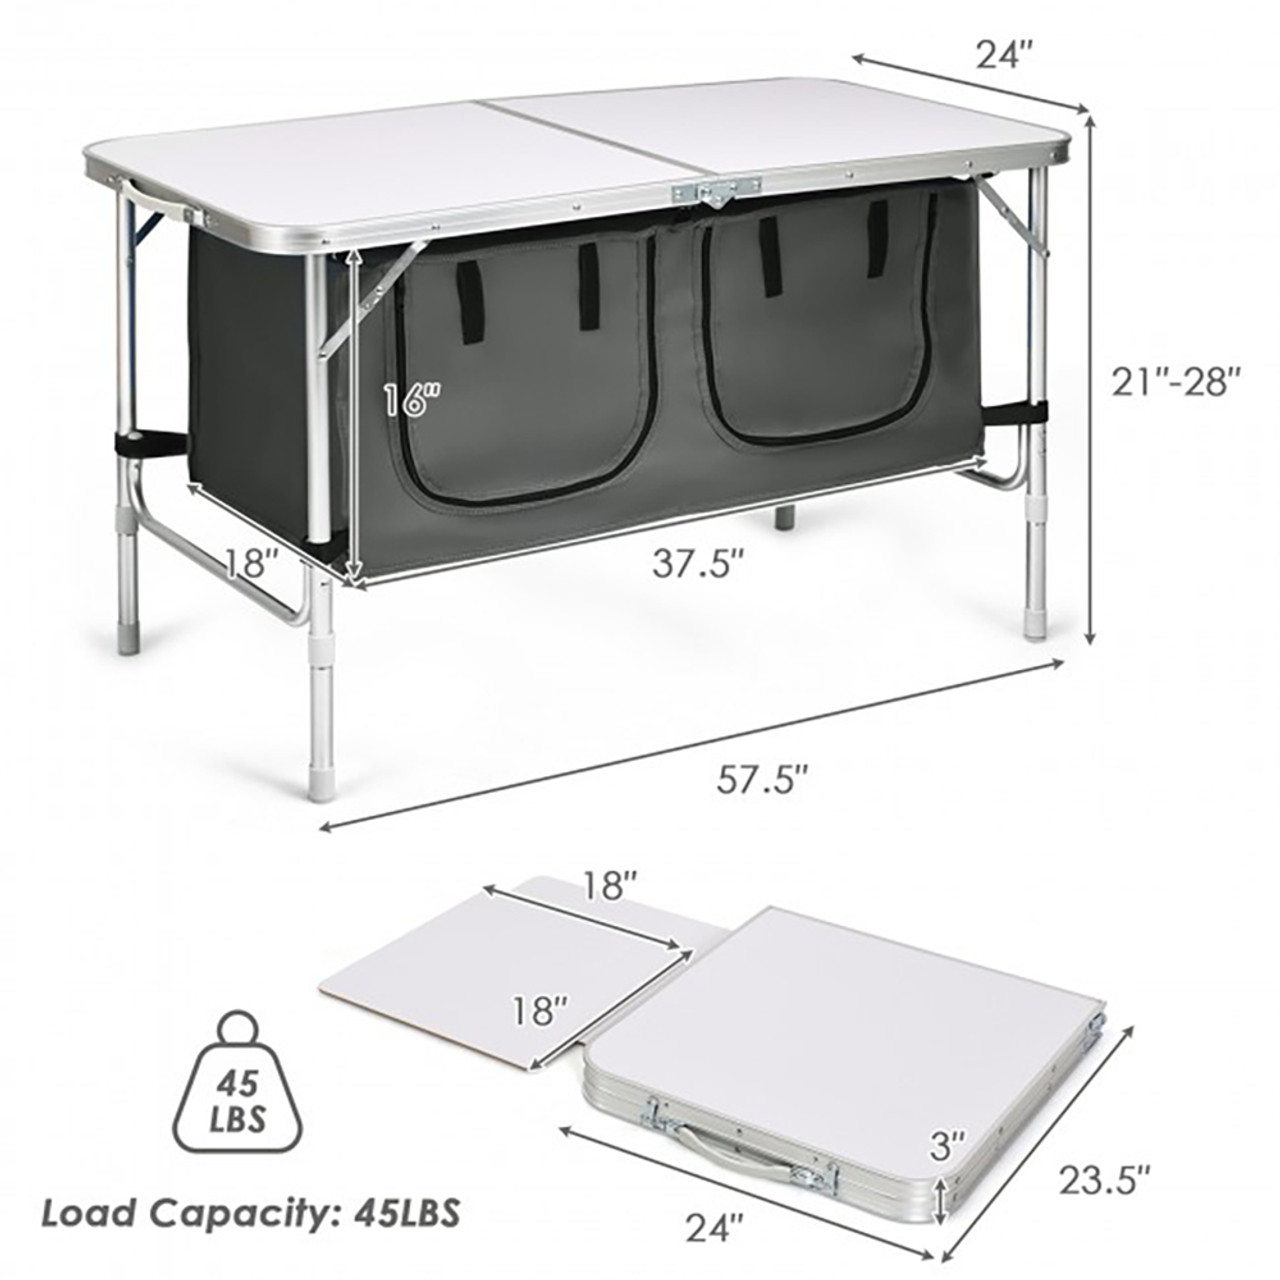 Height Adjustable Folding Camping Table product image